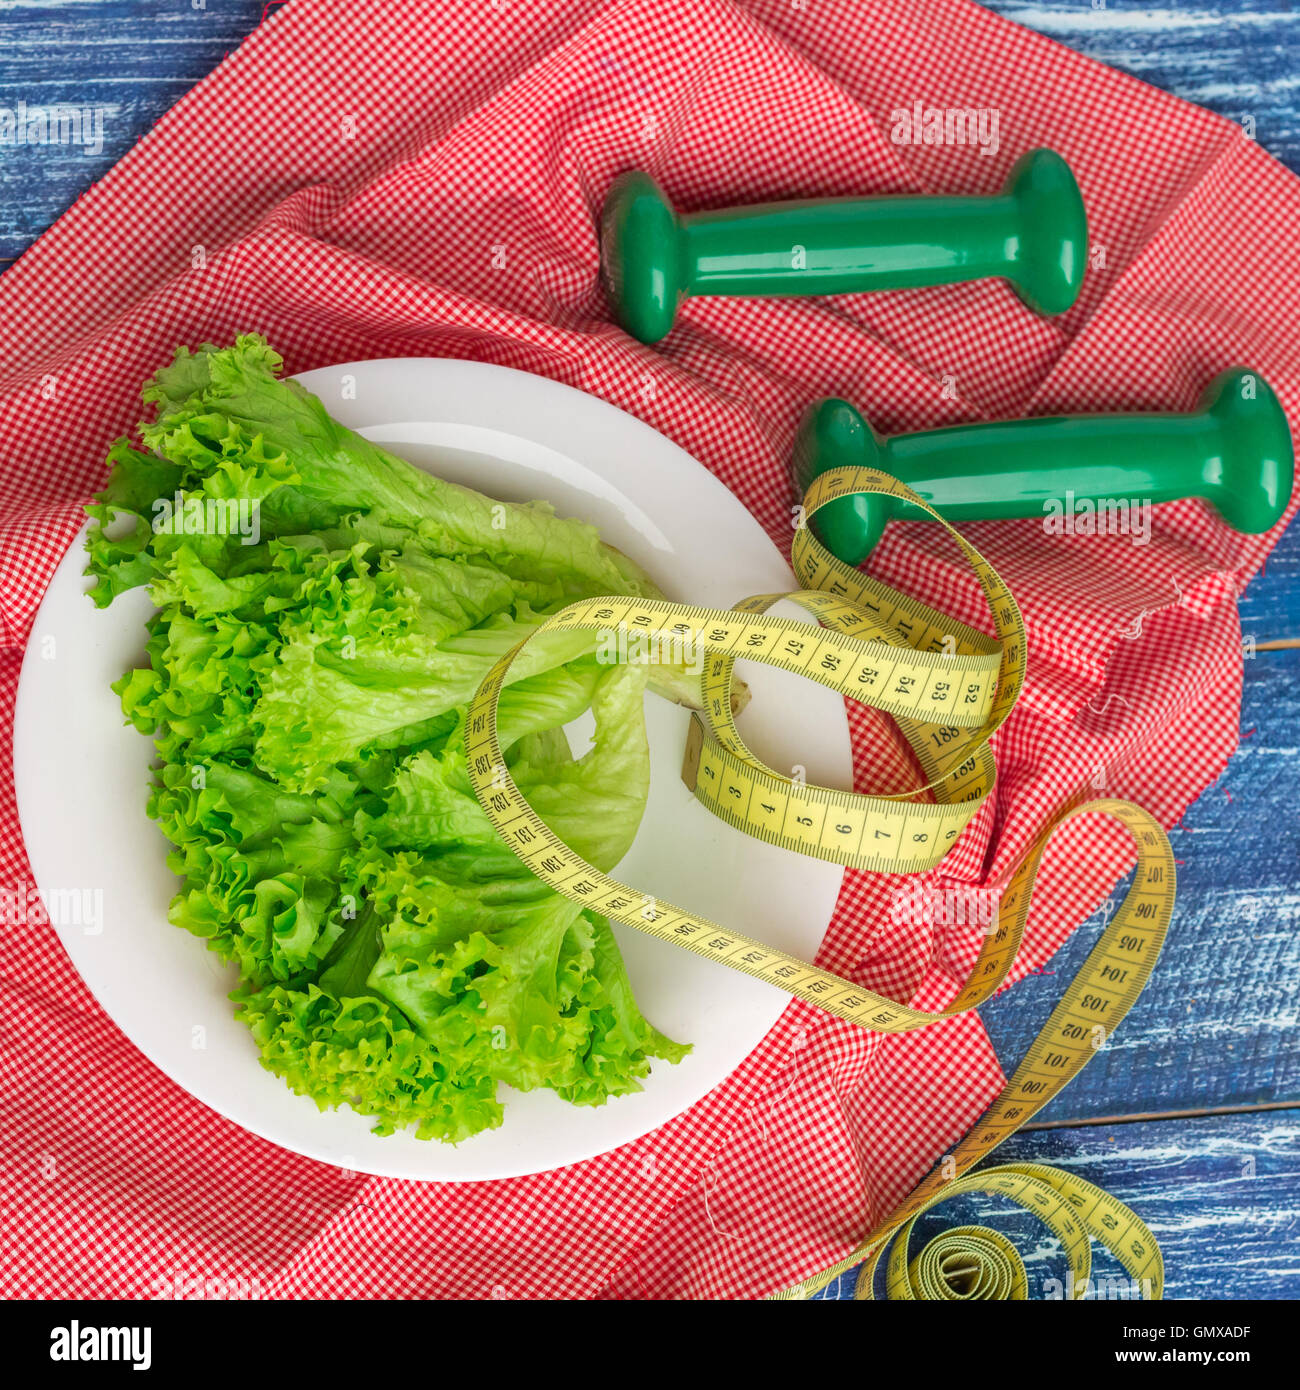 Fitness composition of green lettuce on white plate, weights and ruler Stock Photo